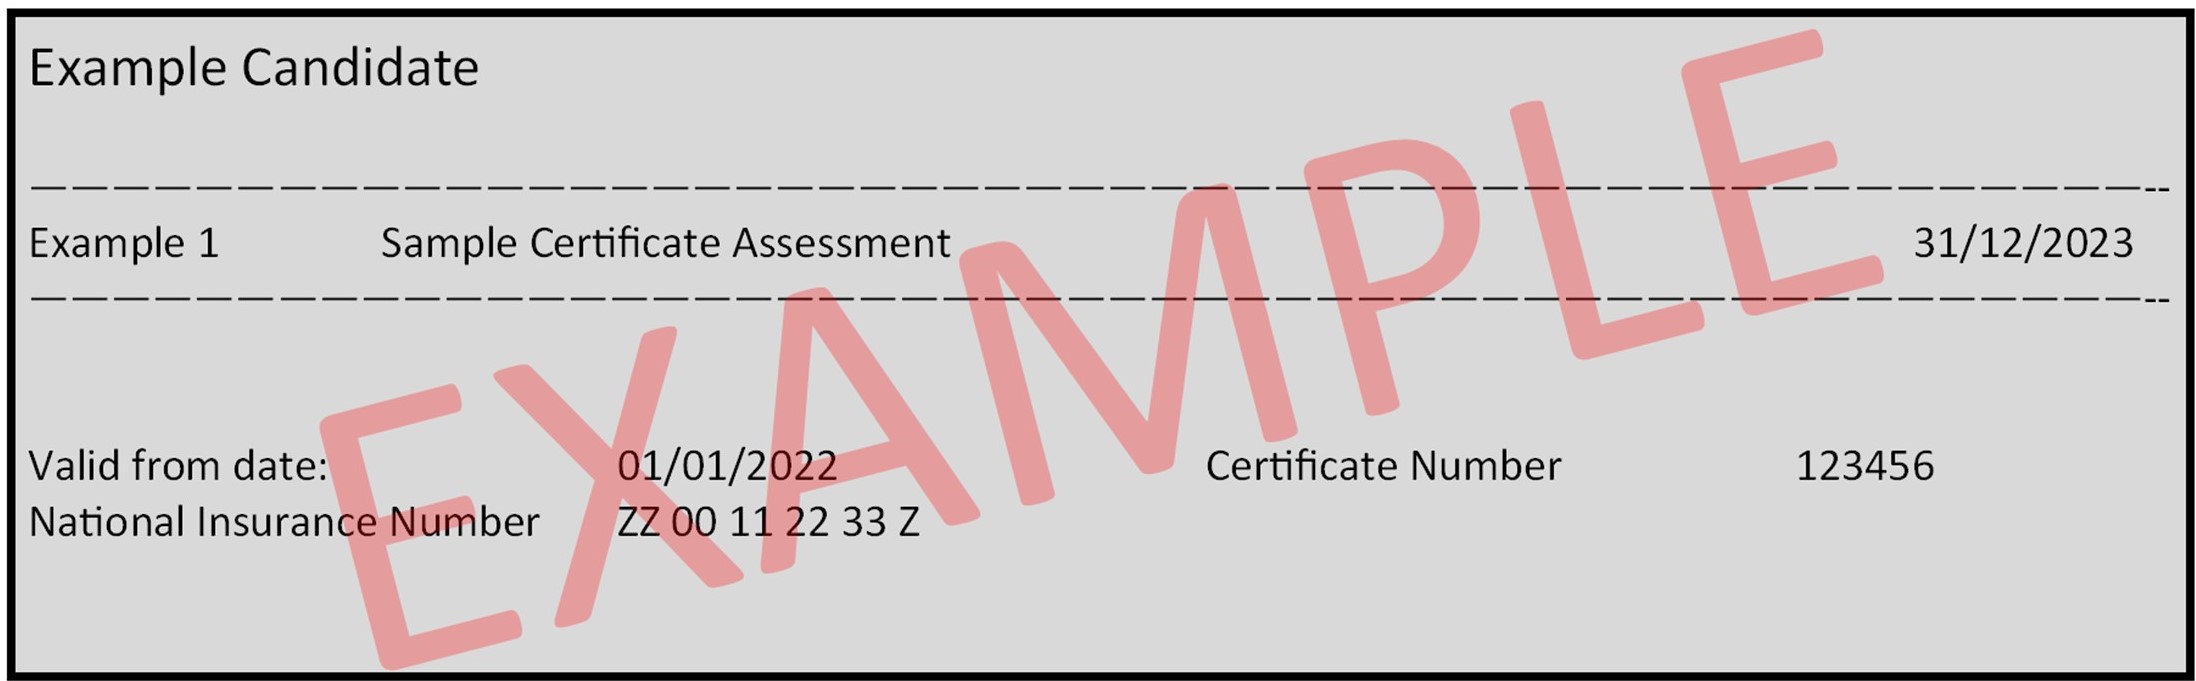 Certification Data Example